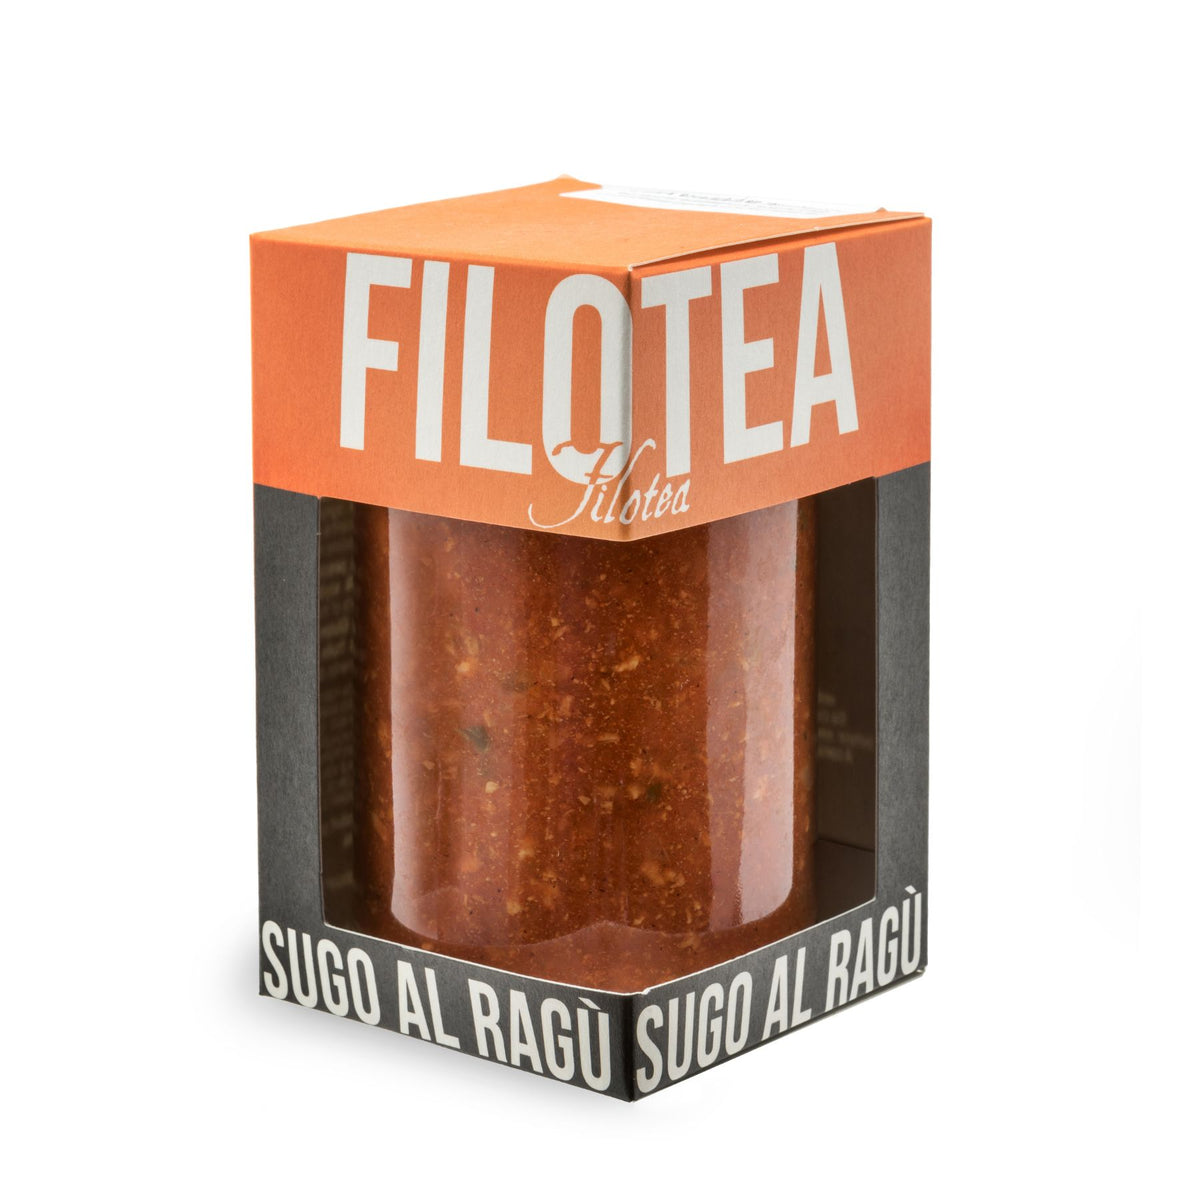 Filotea Sicilian Ragu Pasta Sauce 280g | Imported and distributed in the UK by Just Gourmet Foods